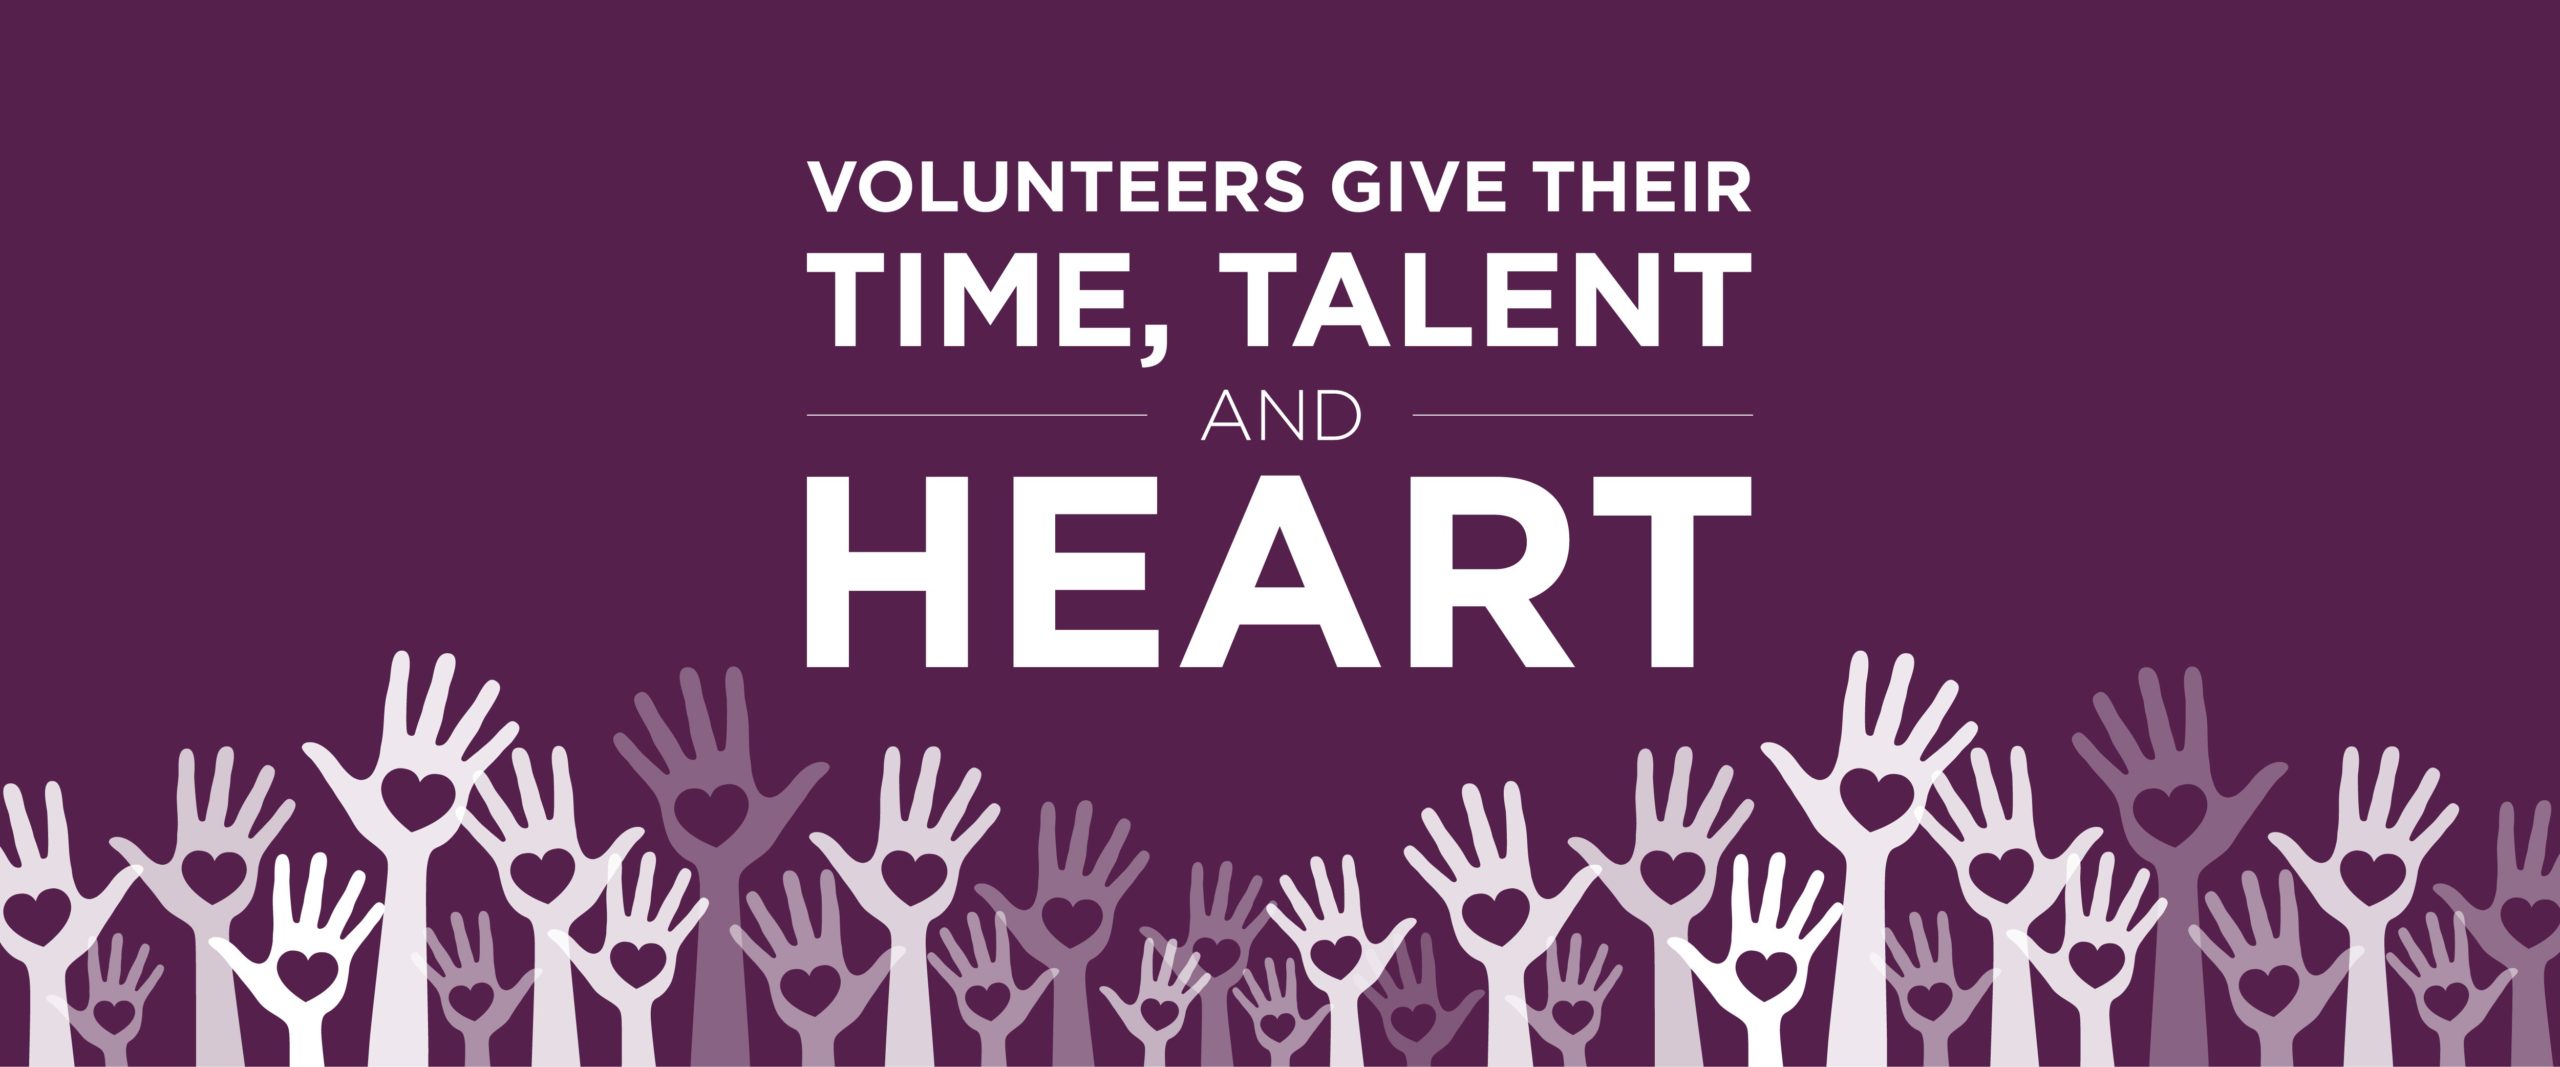 Volunteers give their time, talent and heart